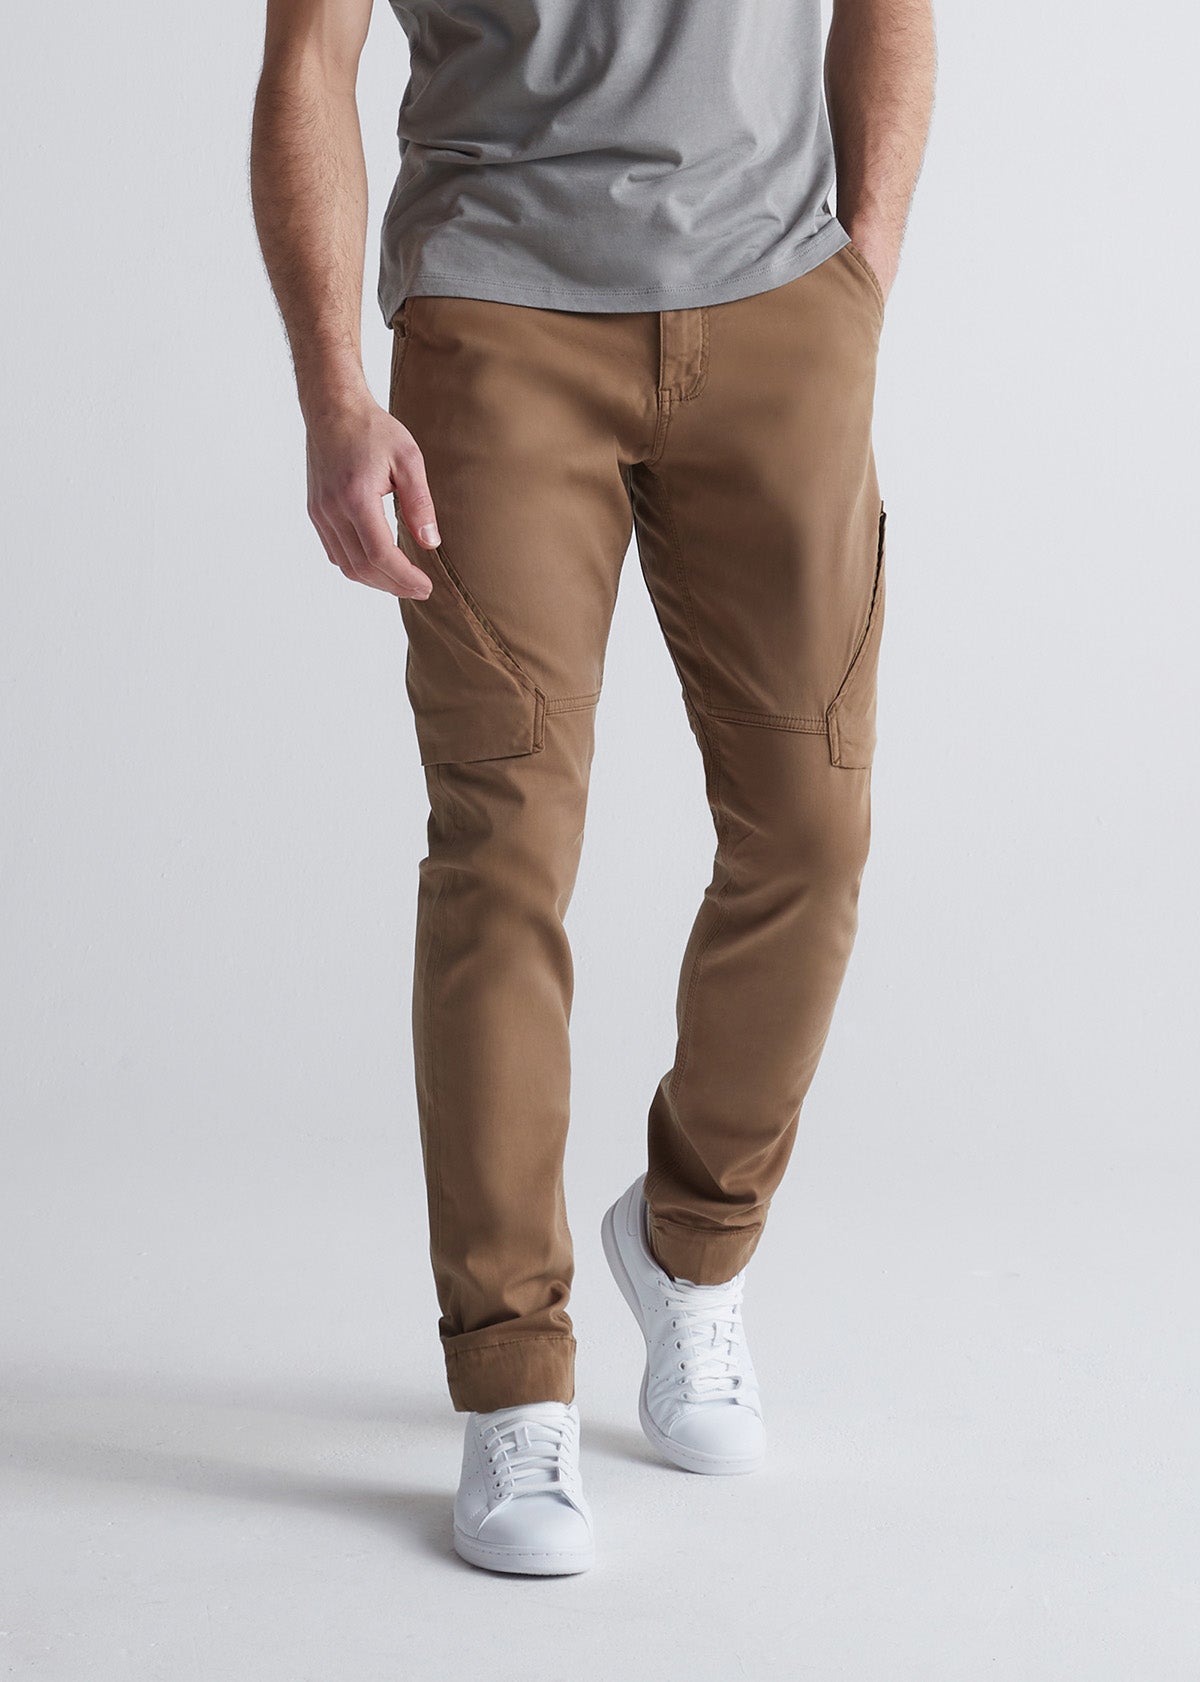 Mens Water Resistant Athletic Convertible Jogger Light brown front